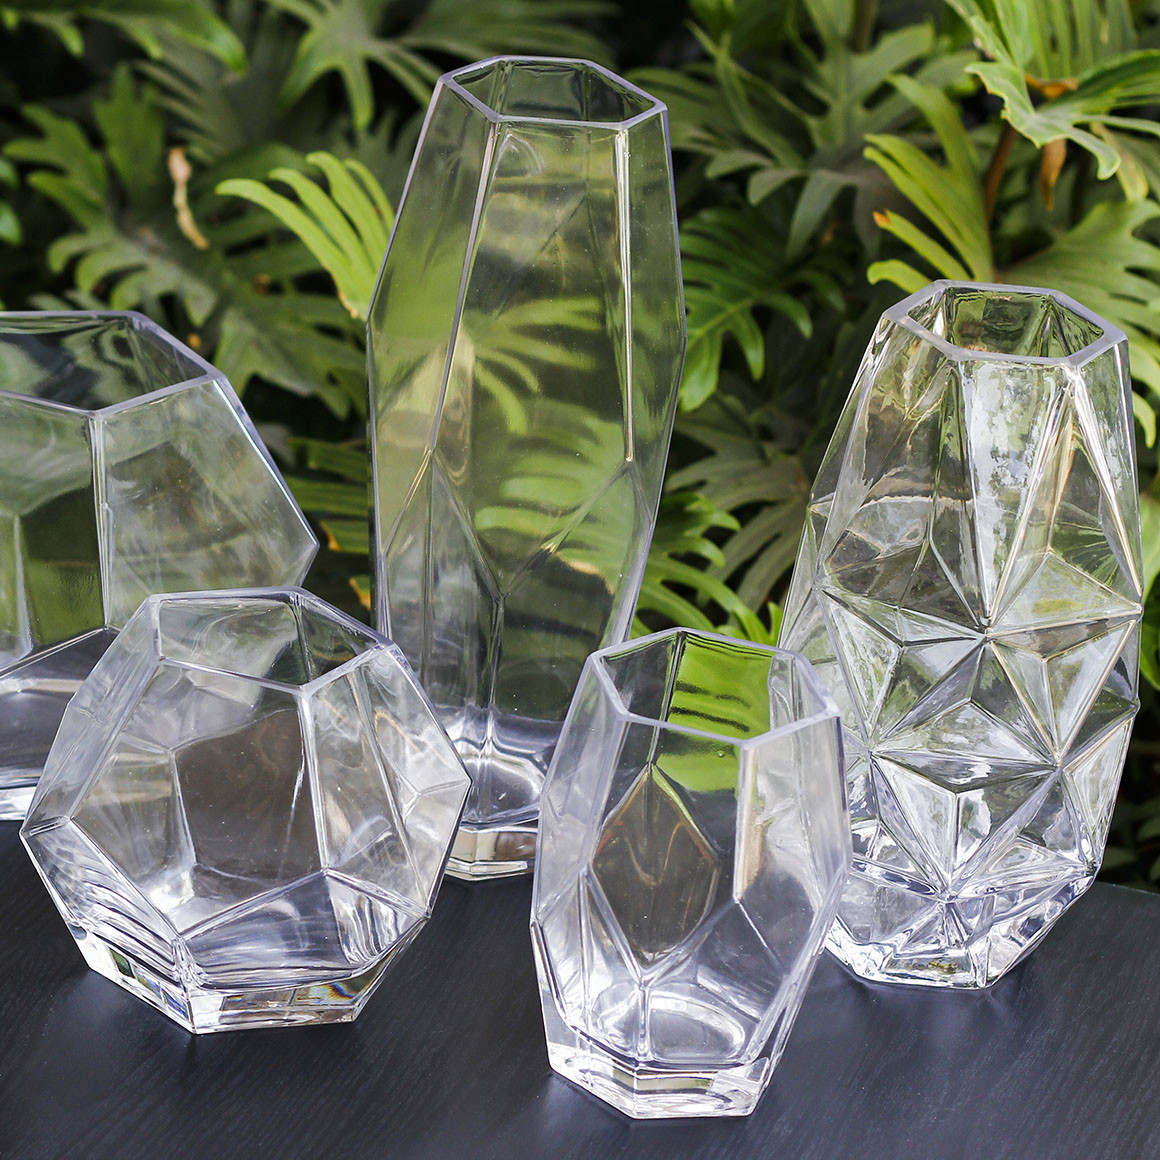 13 attractive Clearance Vases In Bulk 2024 free download clearance vases in bulk of shop wholesale glass vase wedding essentials glass fillers and more inside geometric terrarium vase wholesale